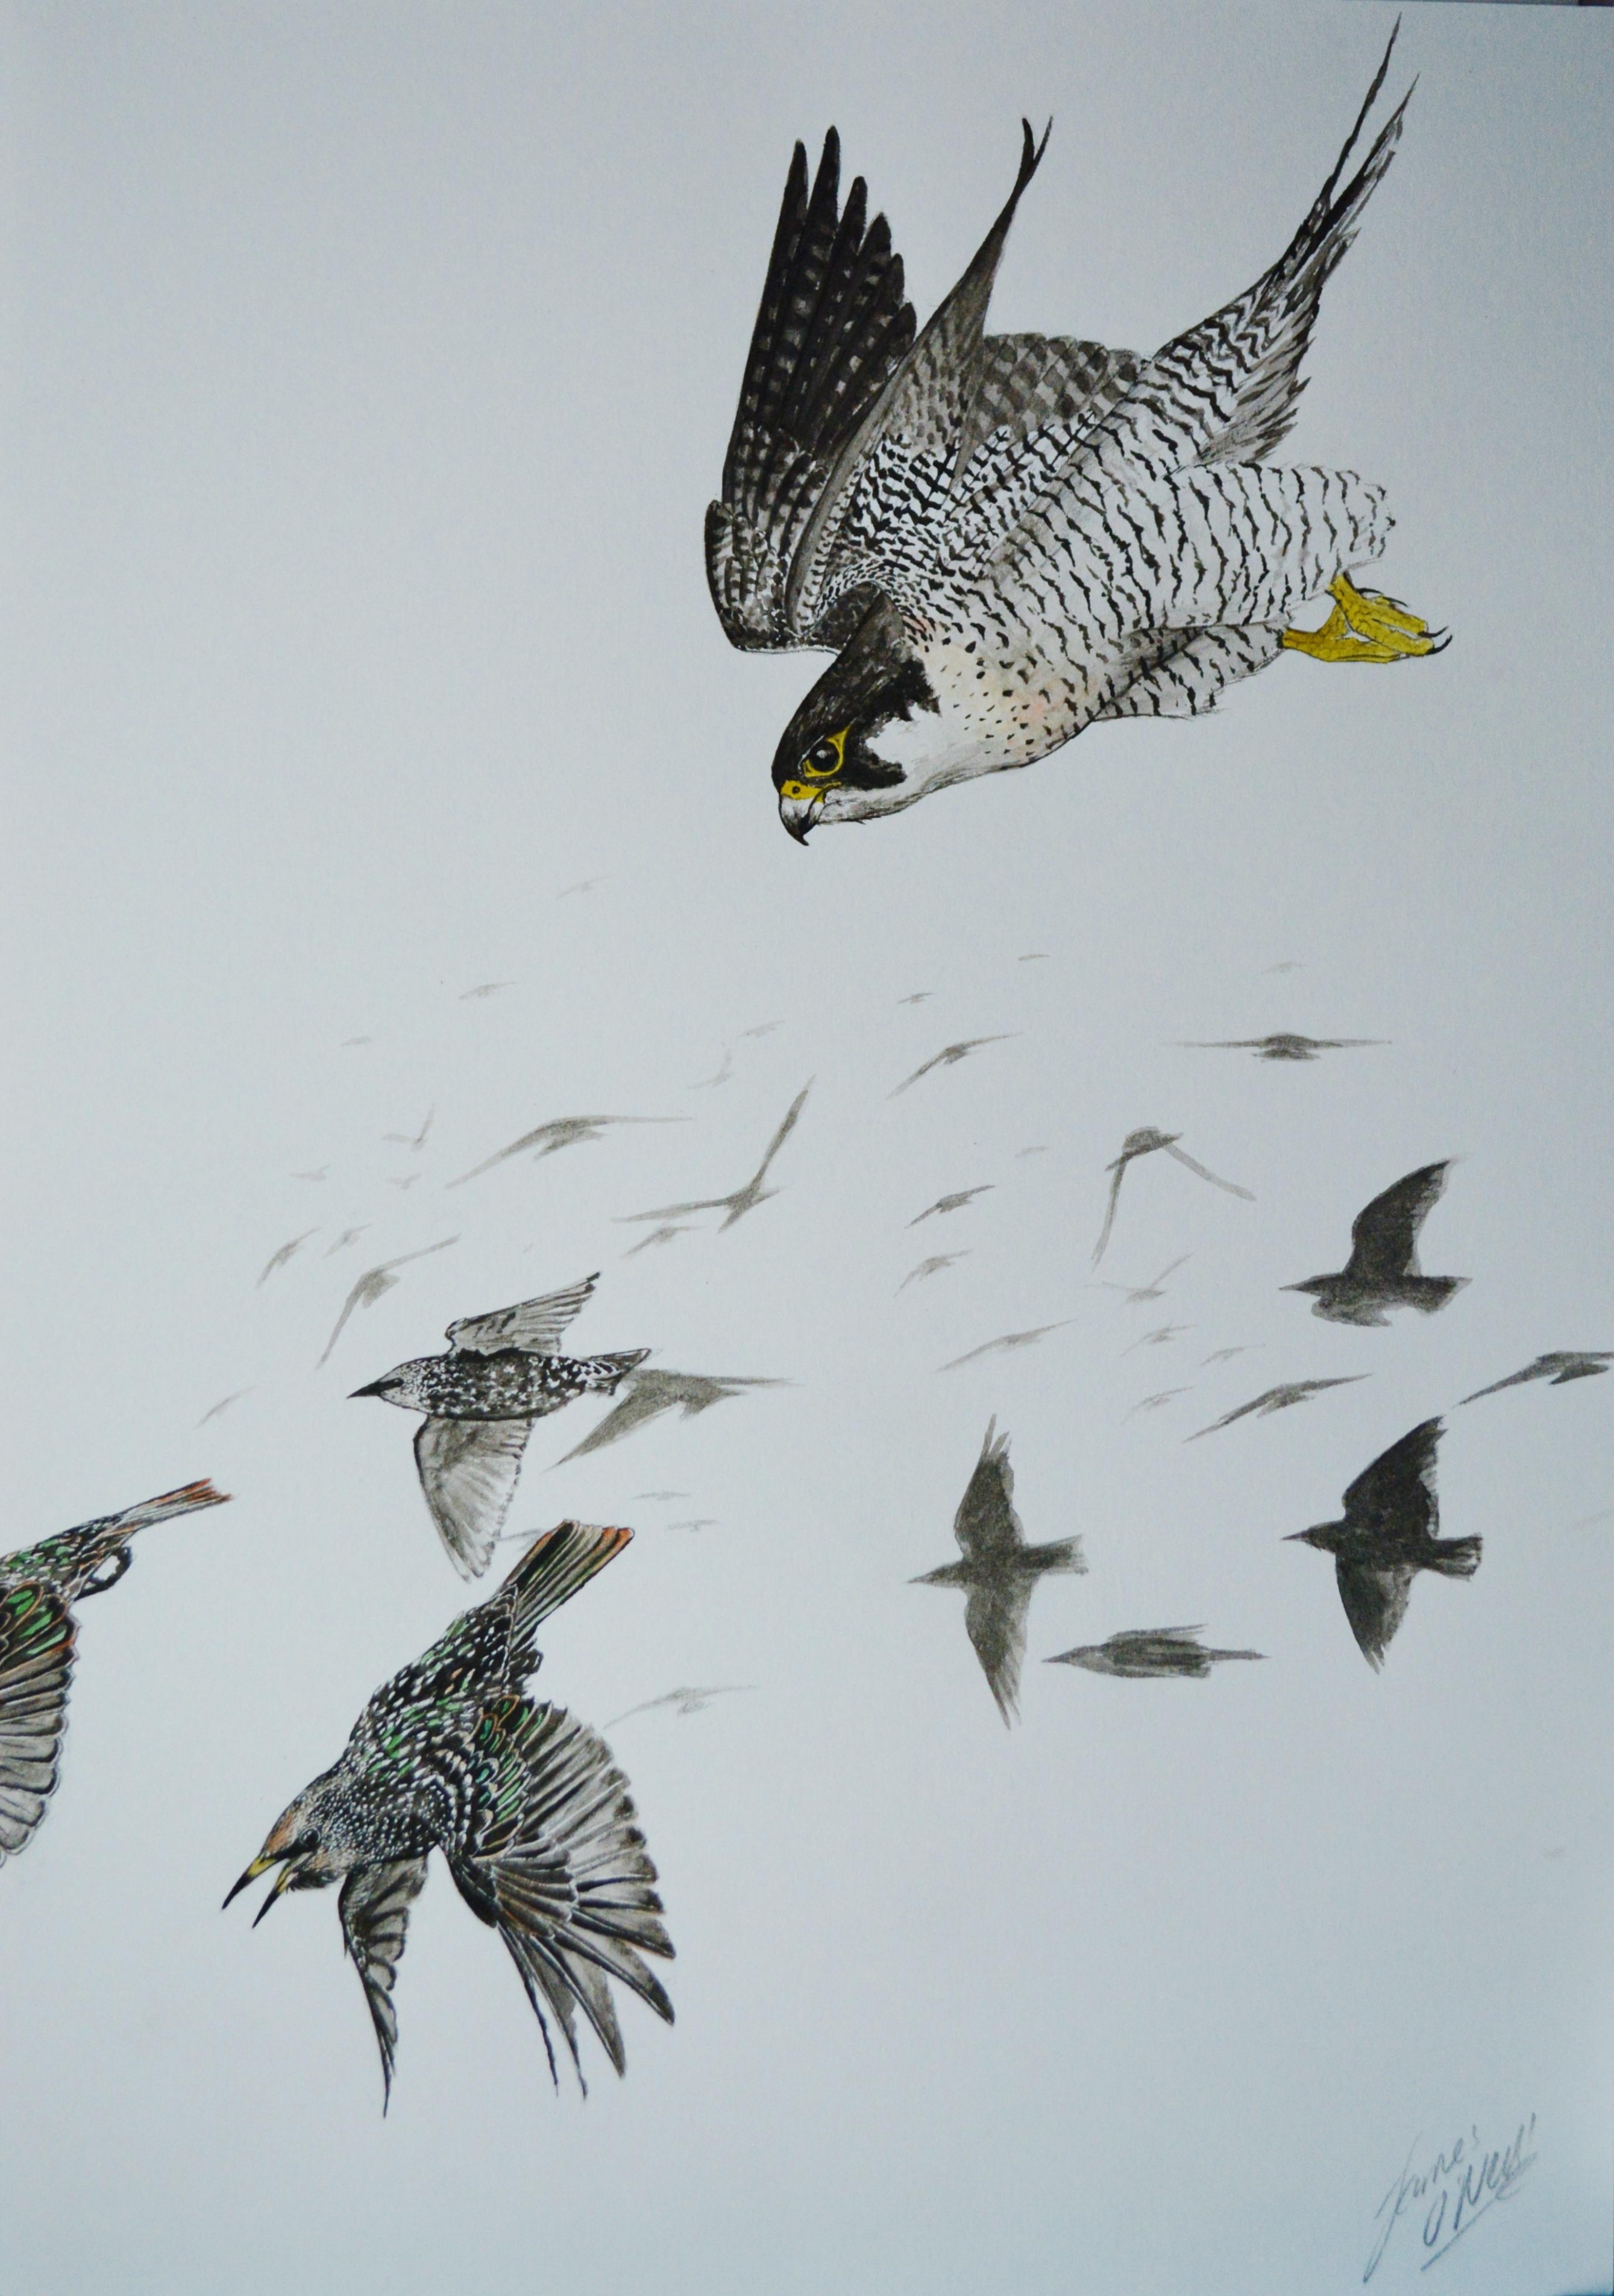 Peregrine Falcon Hunting Starlings, Watercolour, A4 : Art Art Cl Near By Me